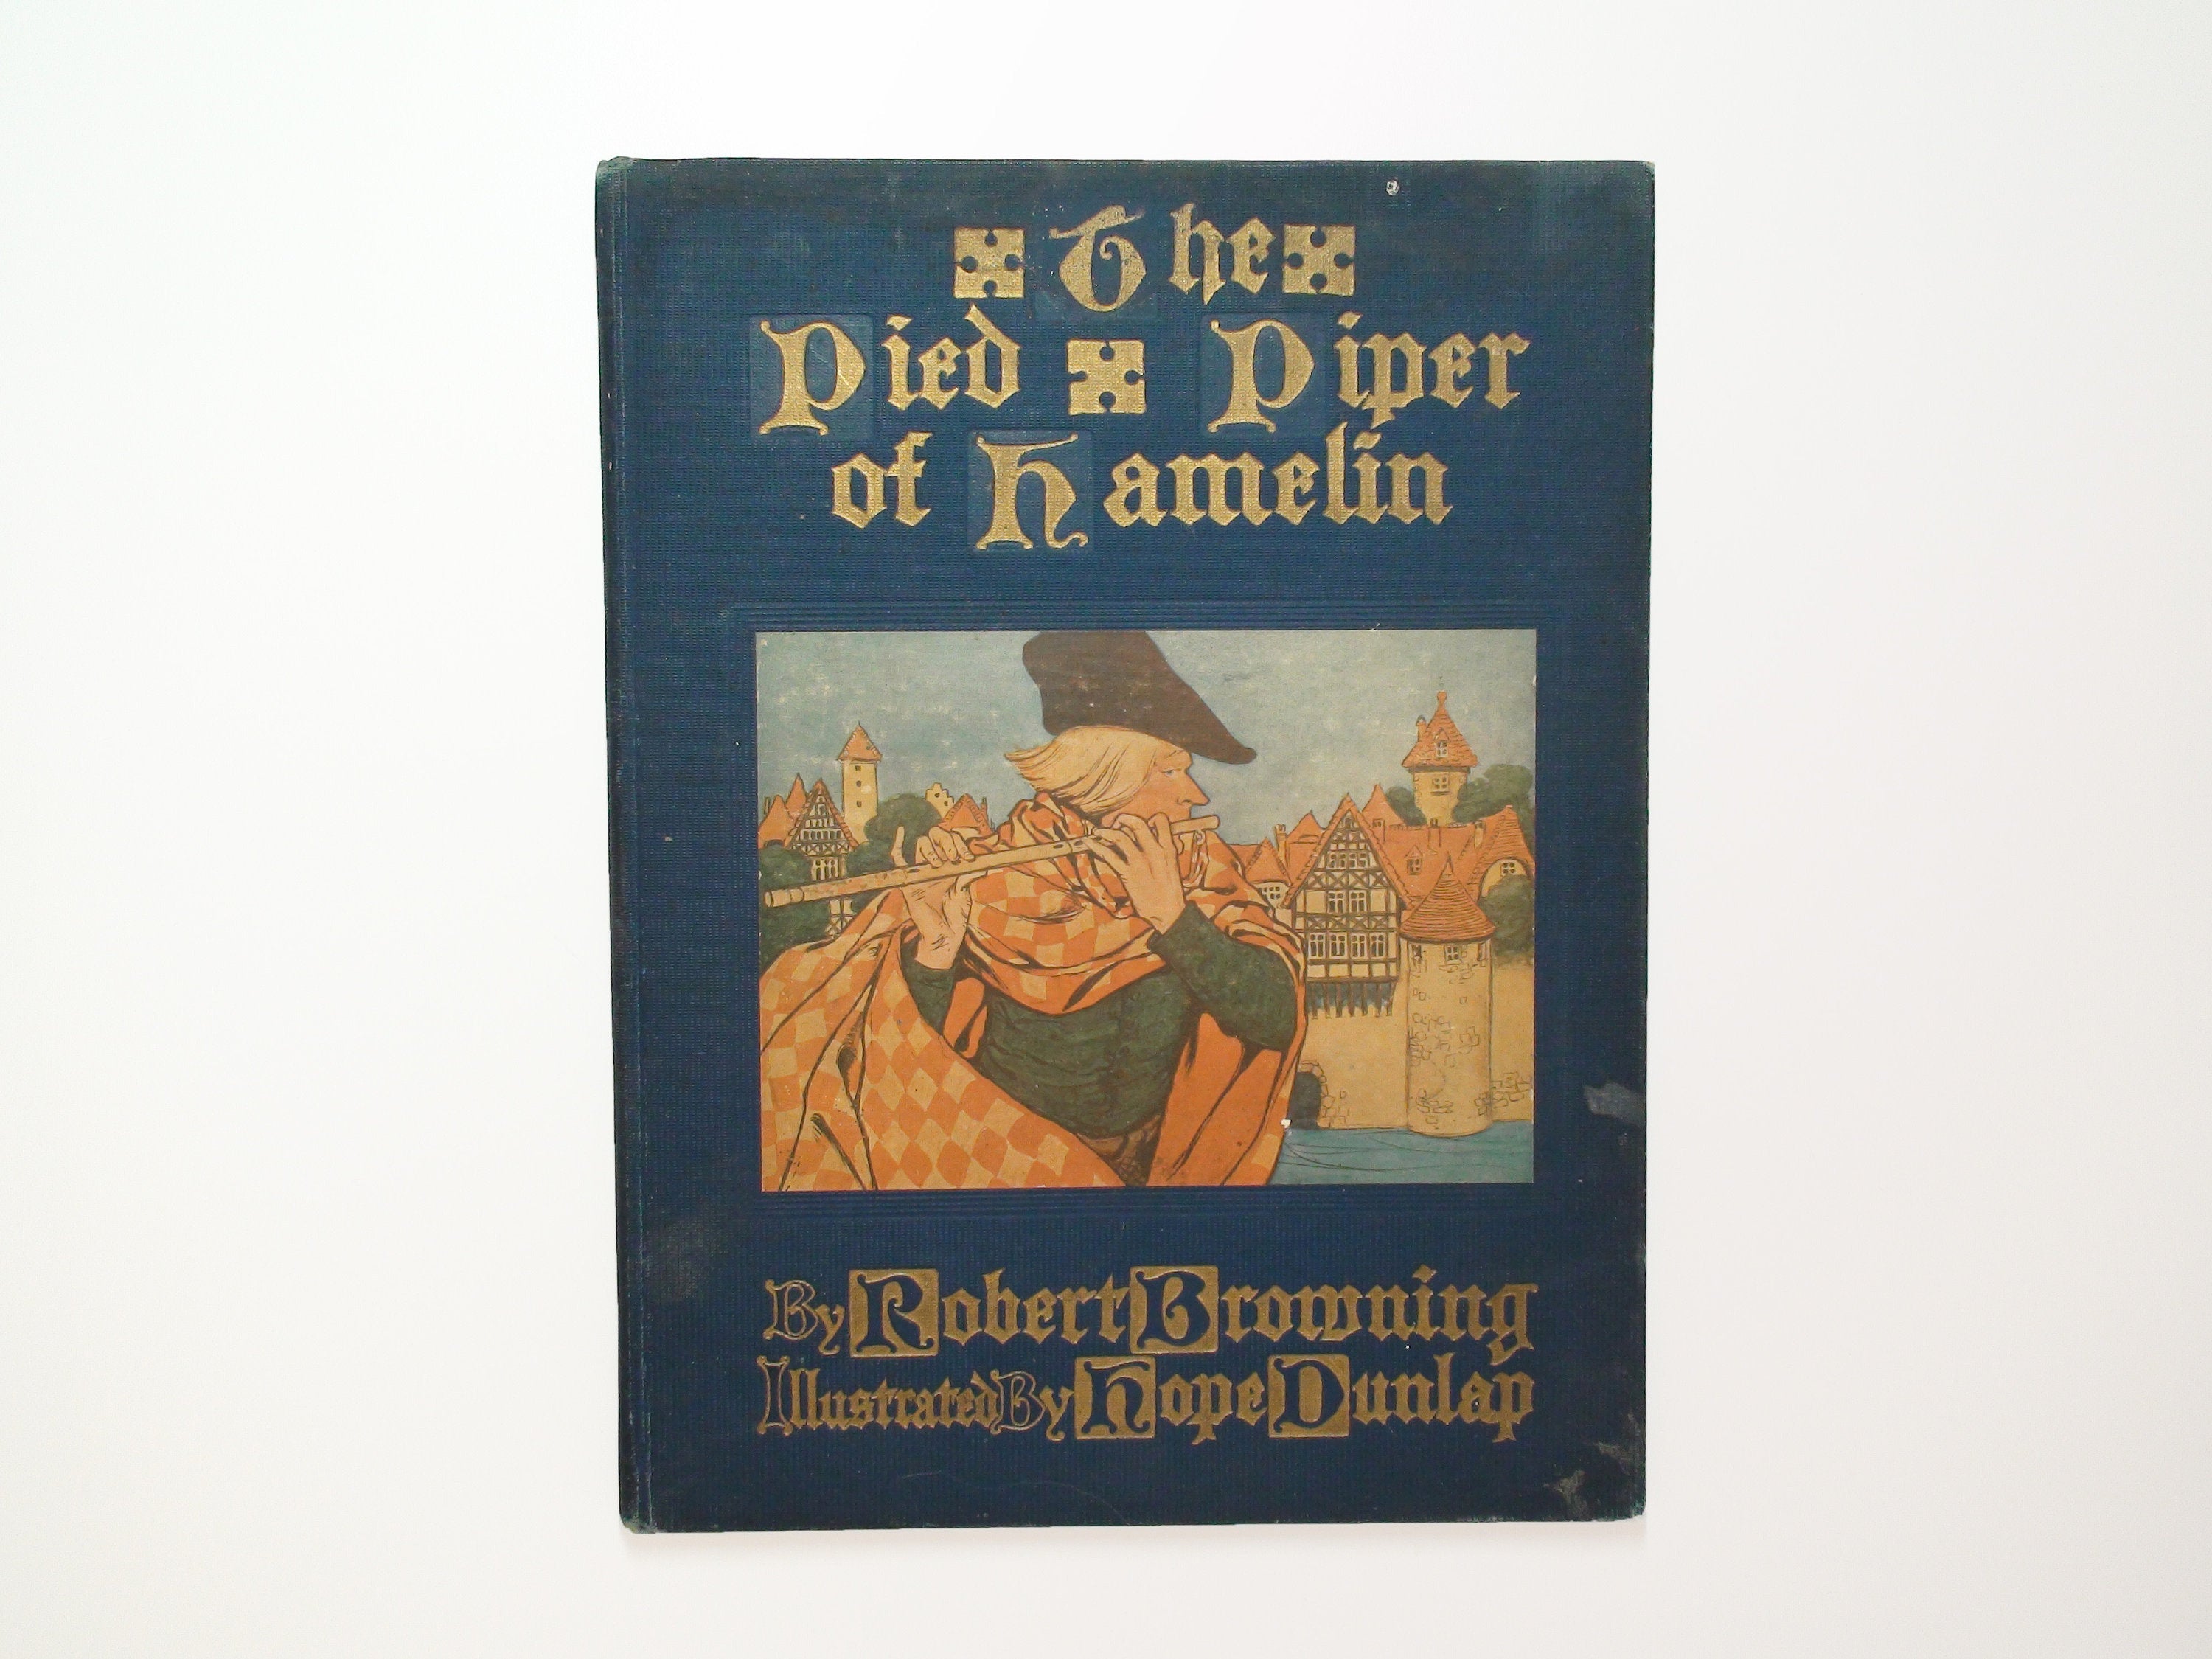 Pied Piper of Hamlin, Robert Browning, Illustrated by Hope Dunlap, 1st Ed, 1910